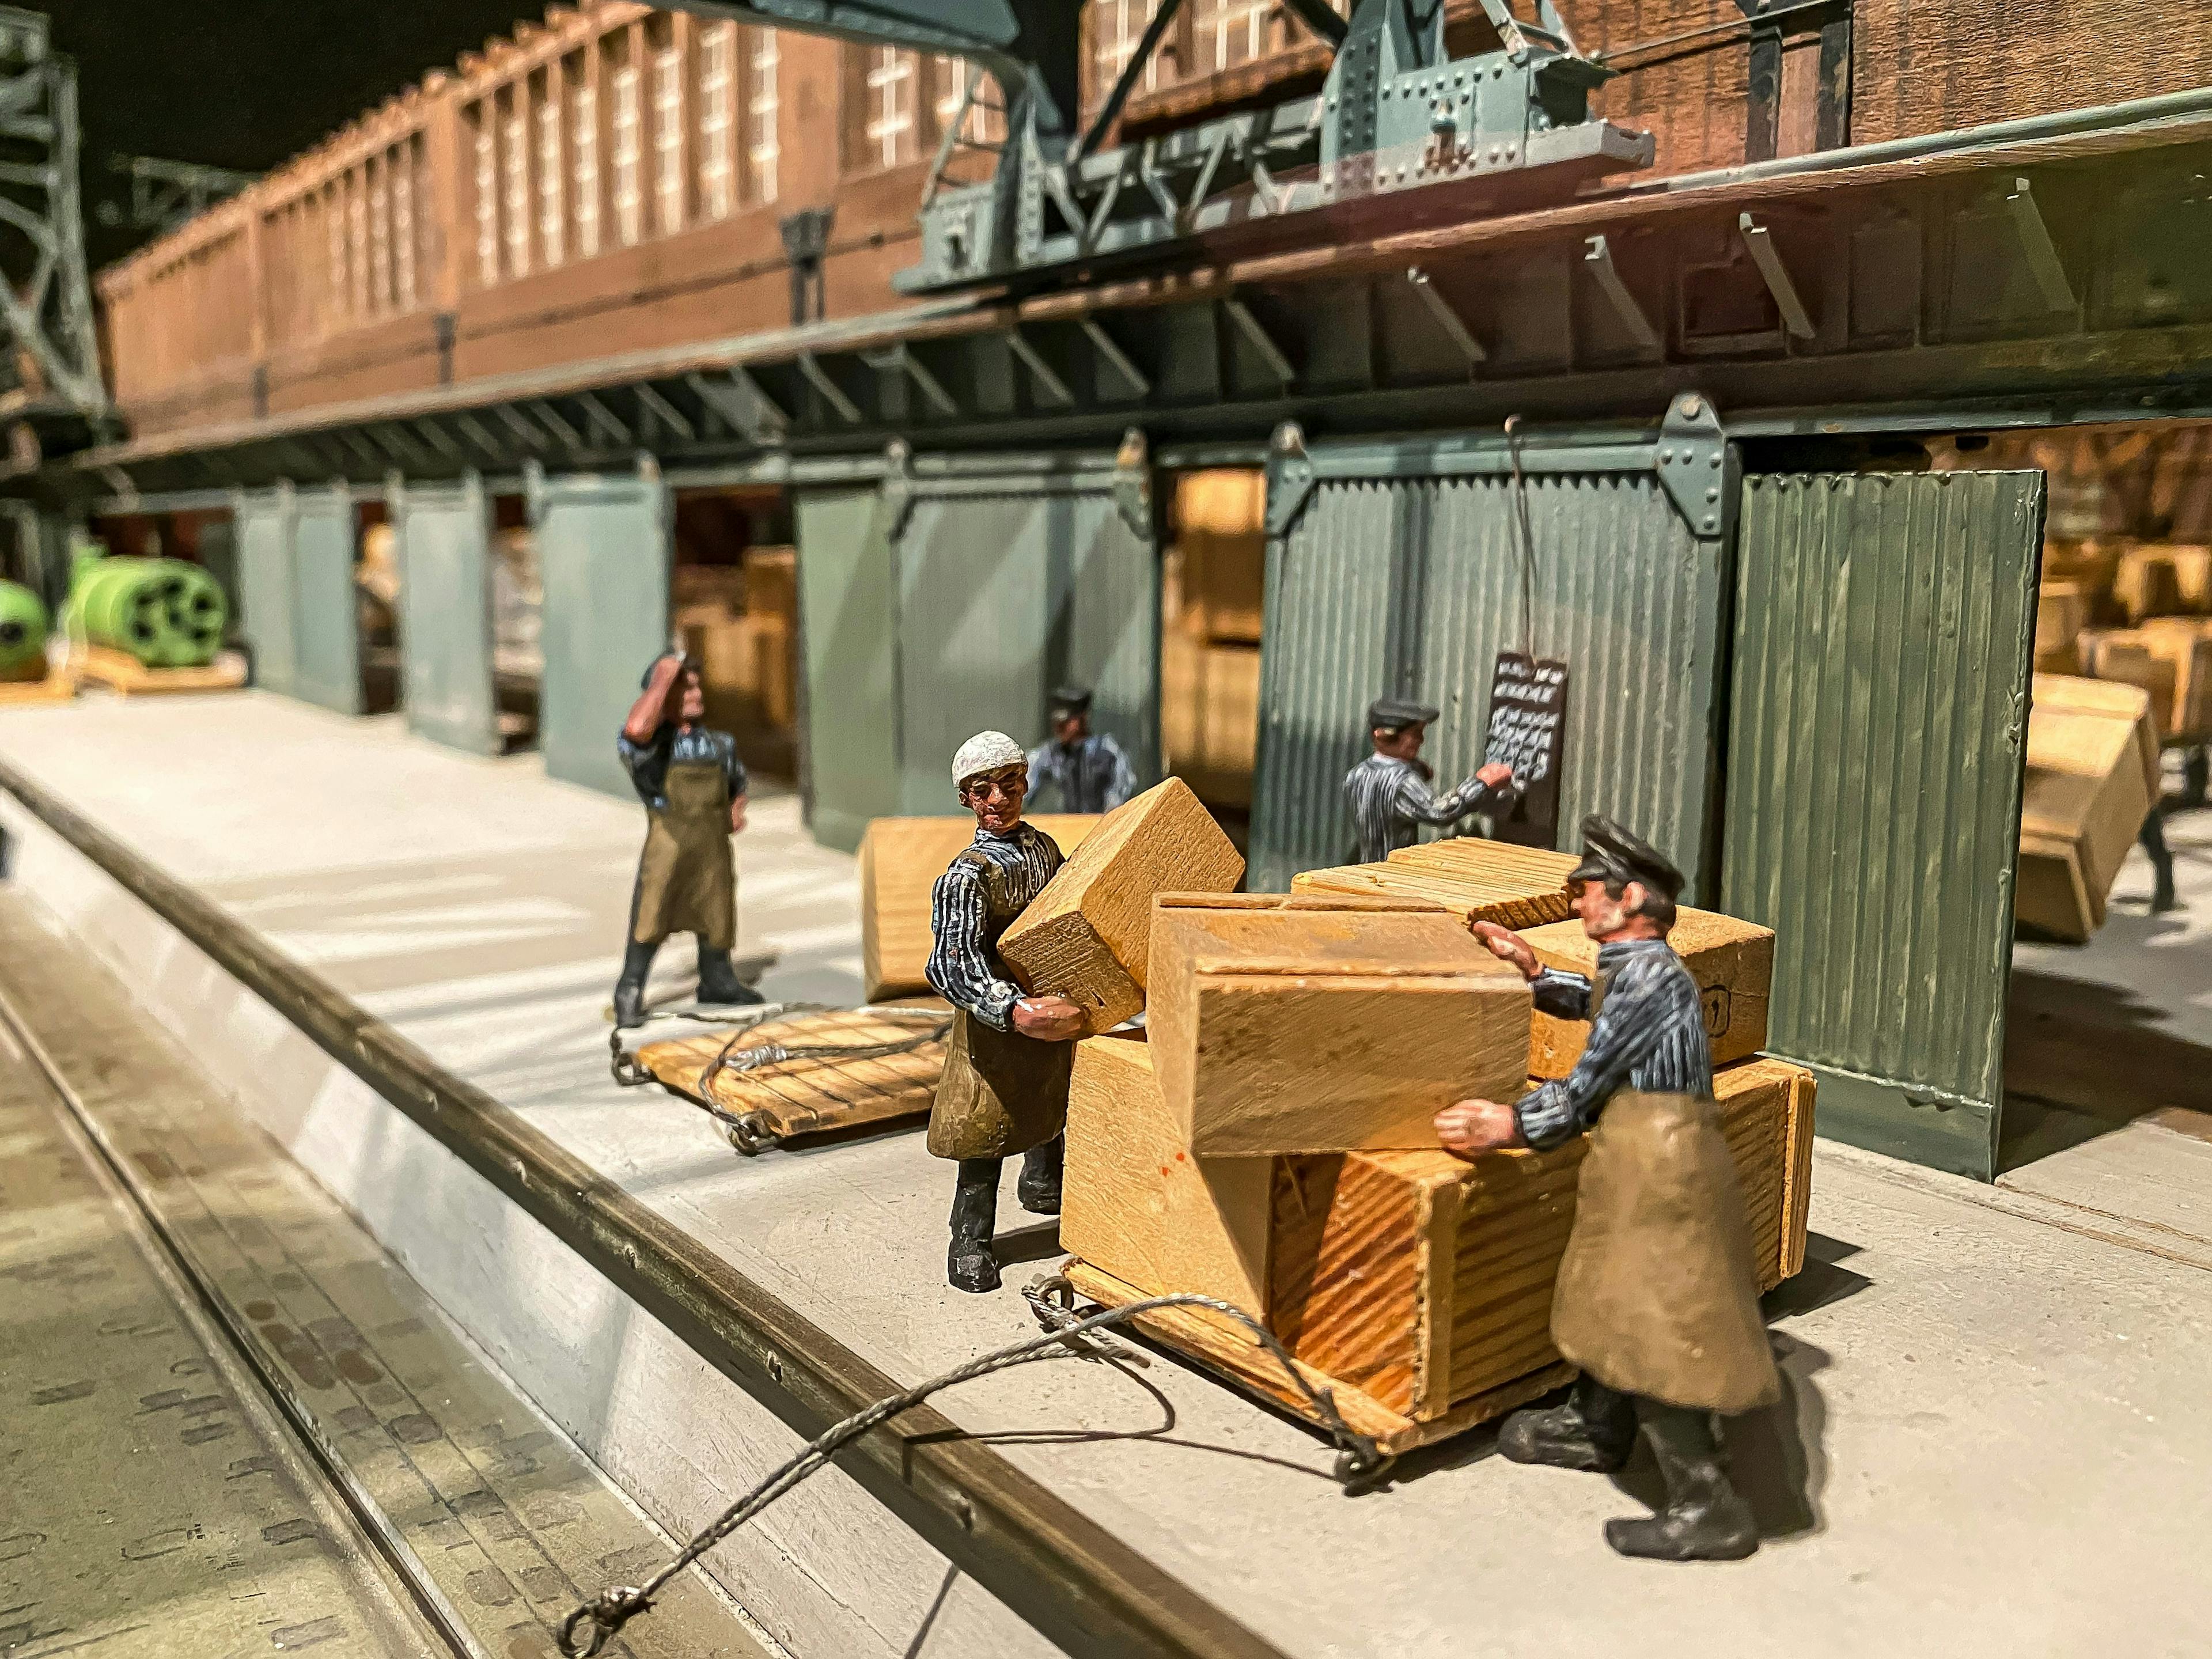 a group of people playing instruments on a train track